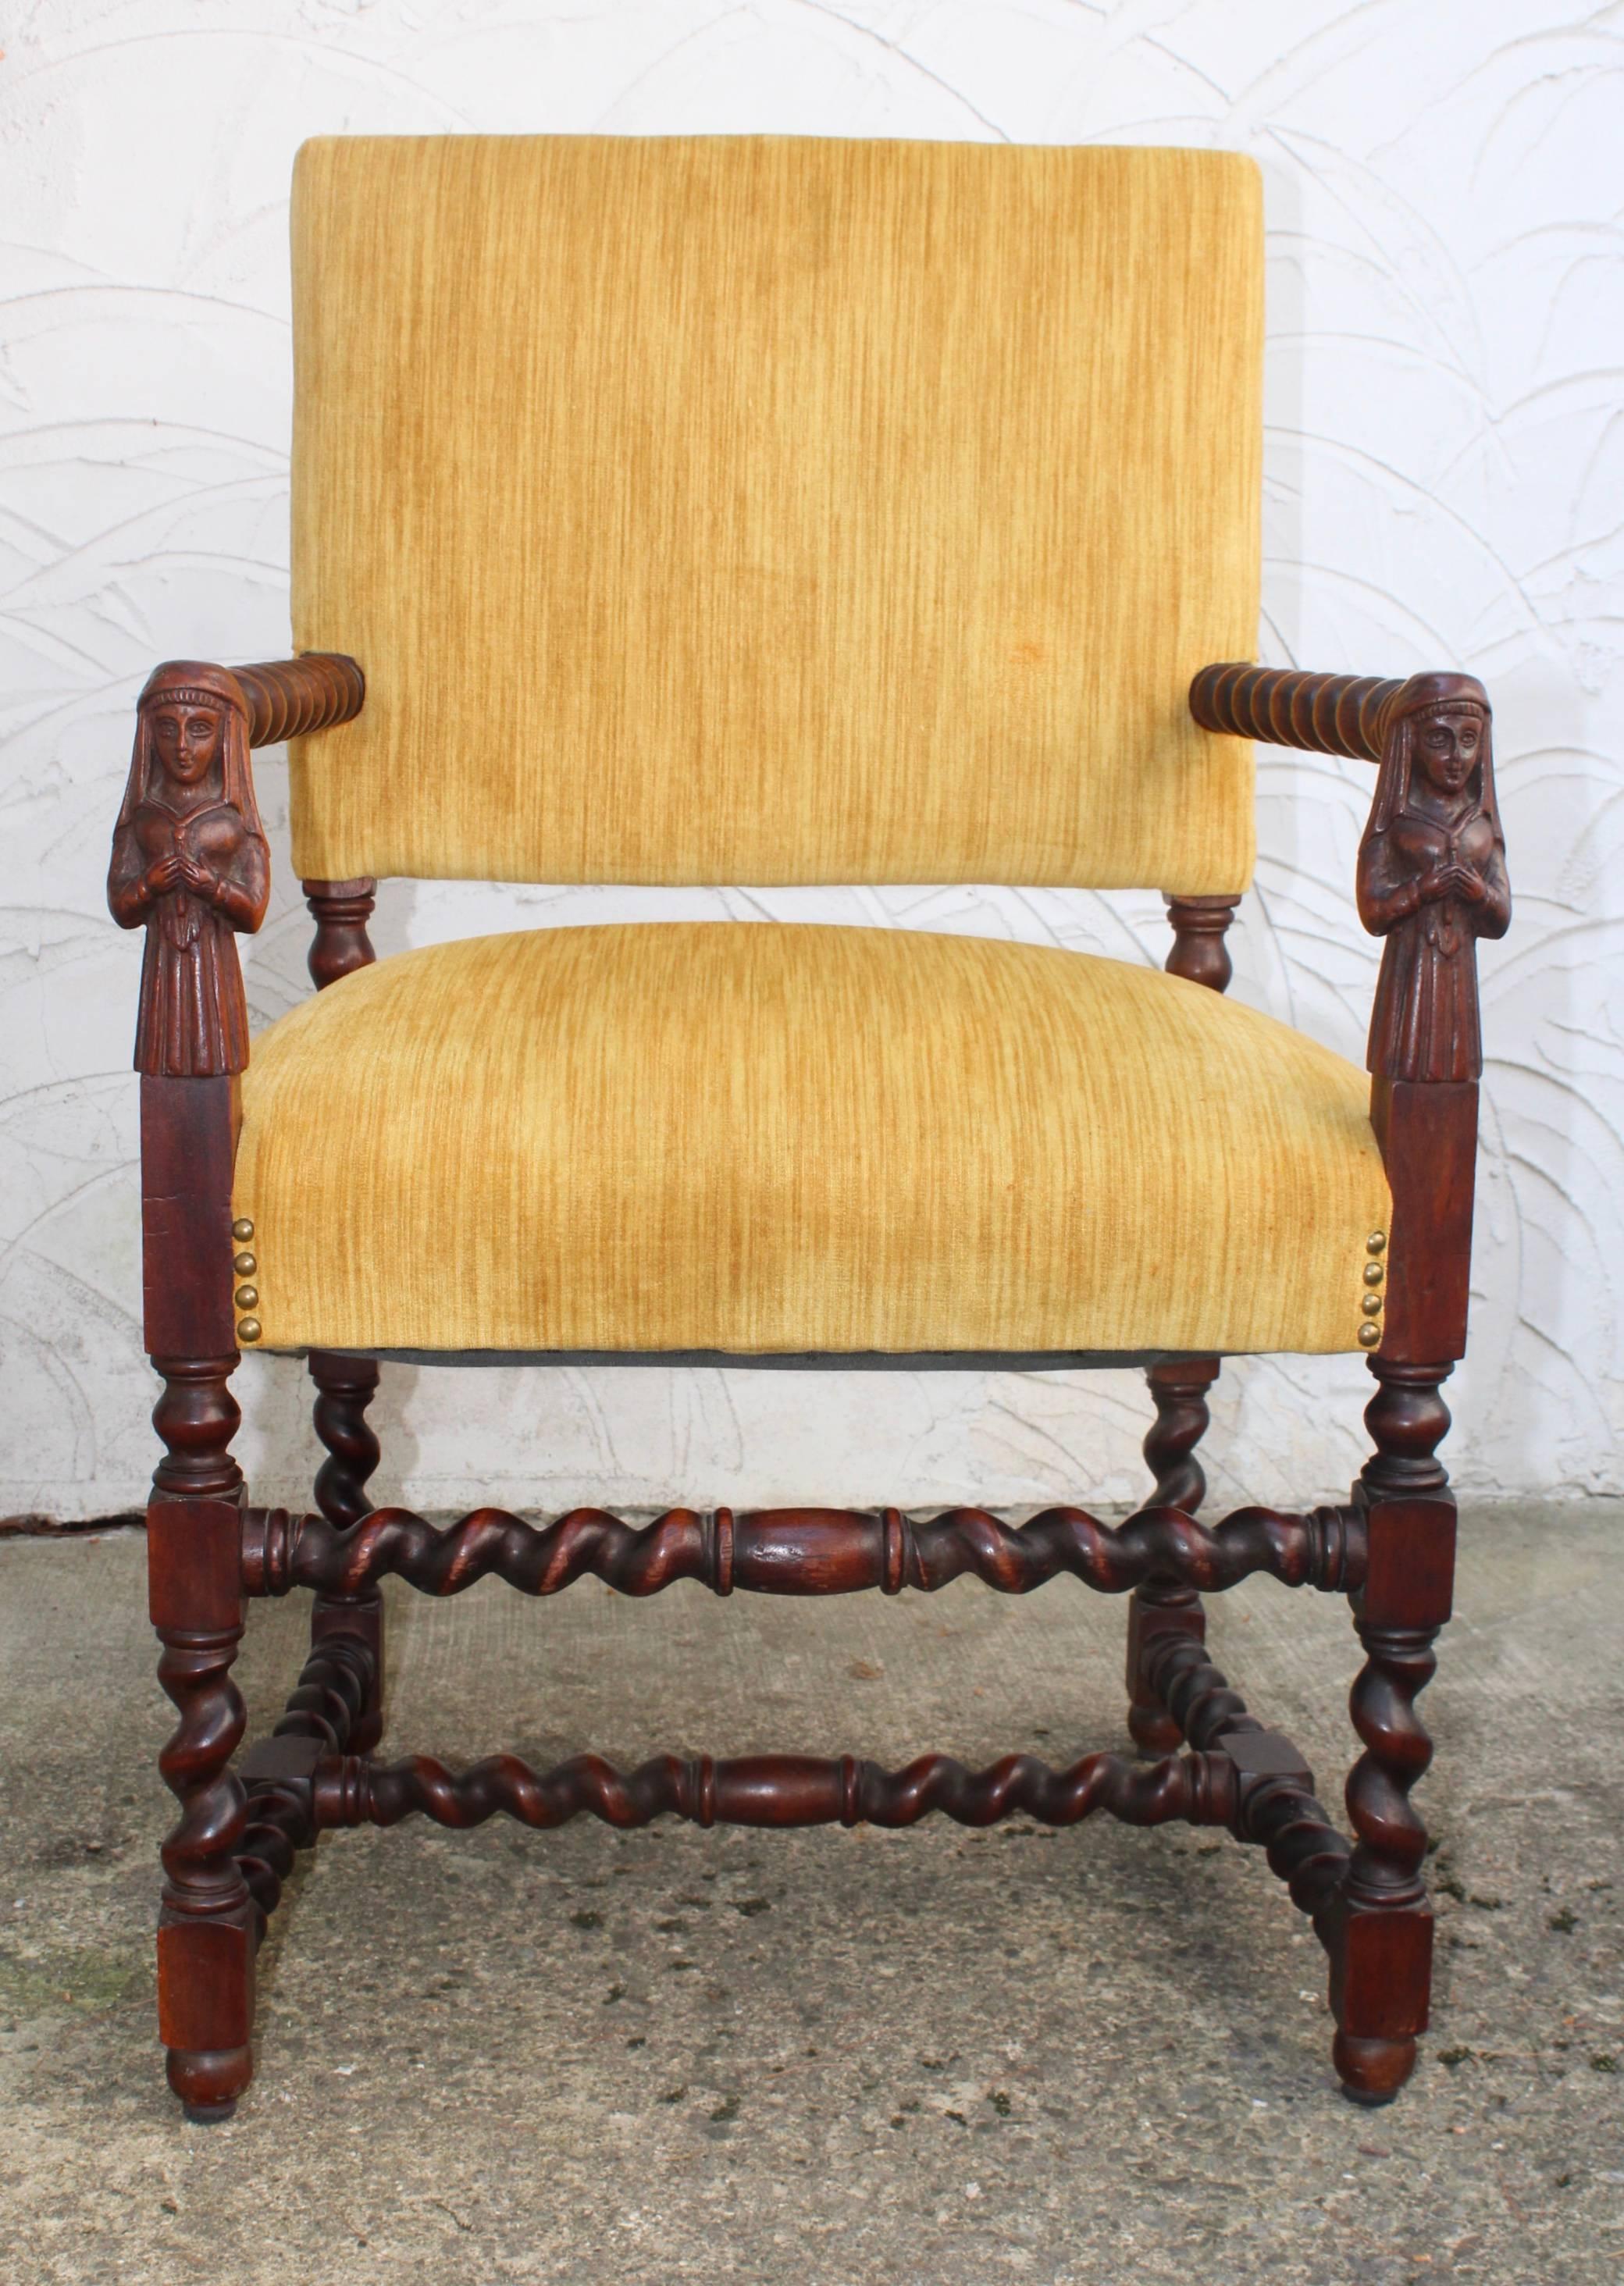 Stunning late 1800s Franco Flemish carved walnut armchair, in original vintage condition with vintage upholstery.